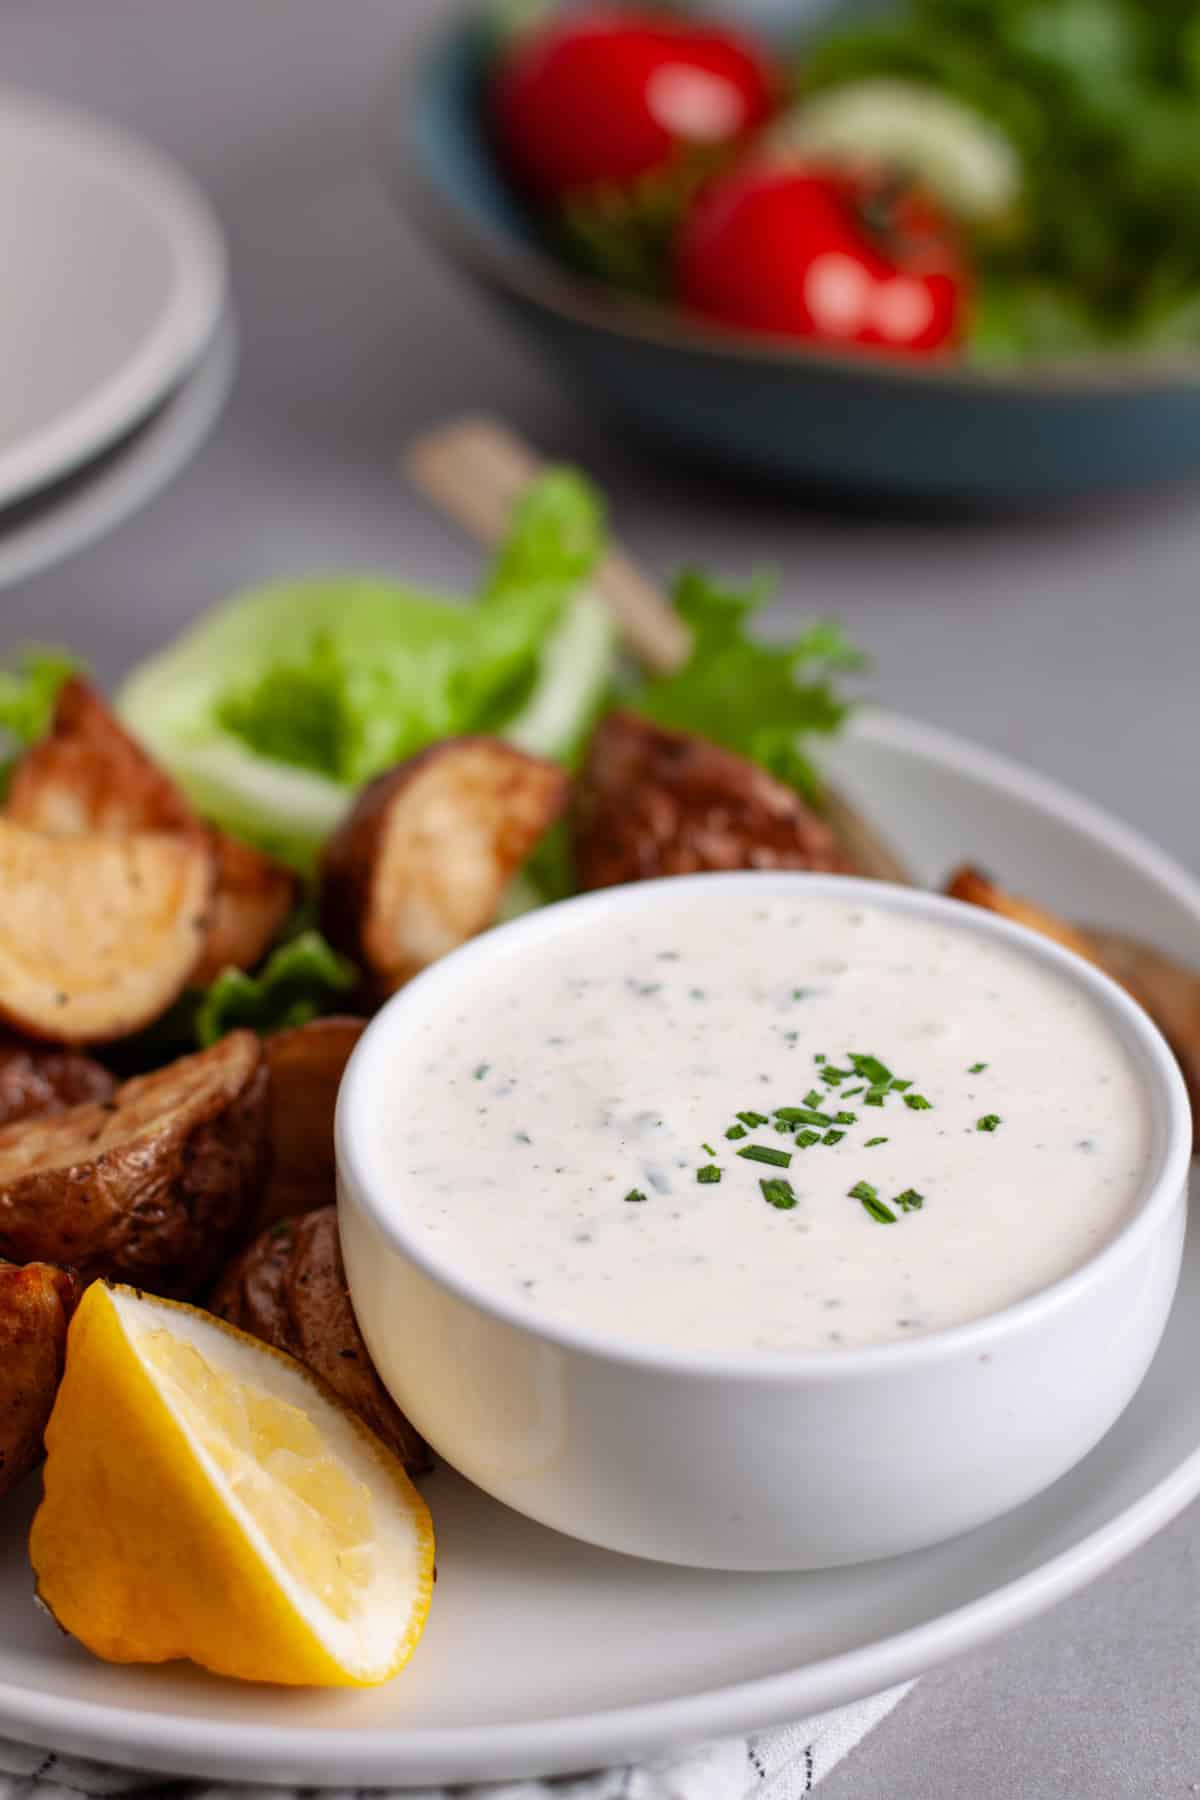 A small bowl with horseradish aioli topped with fresh chives on a plate with crispy fried potatoes.